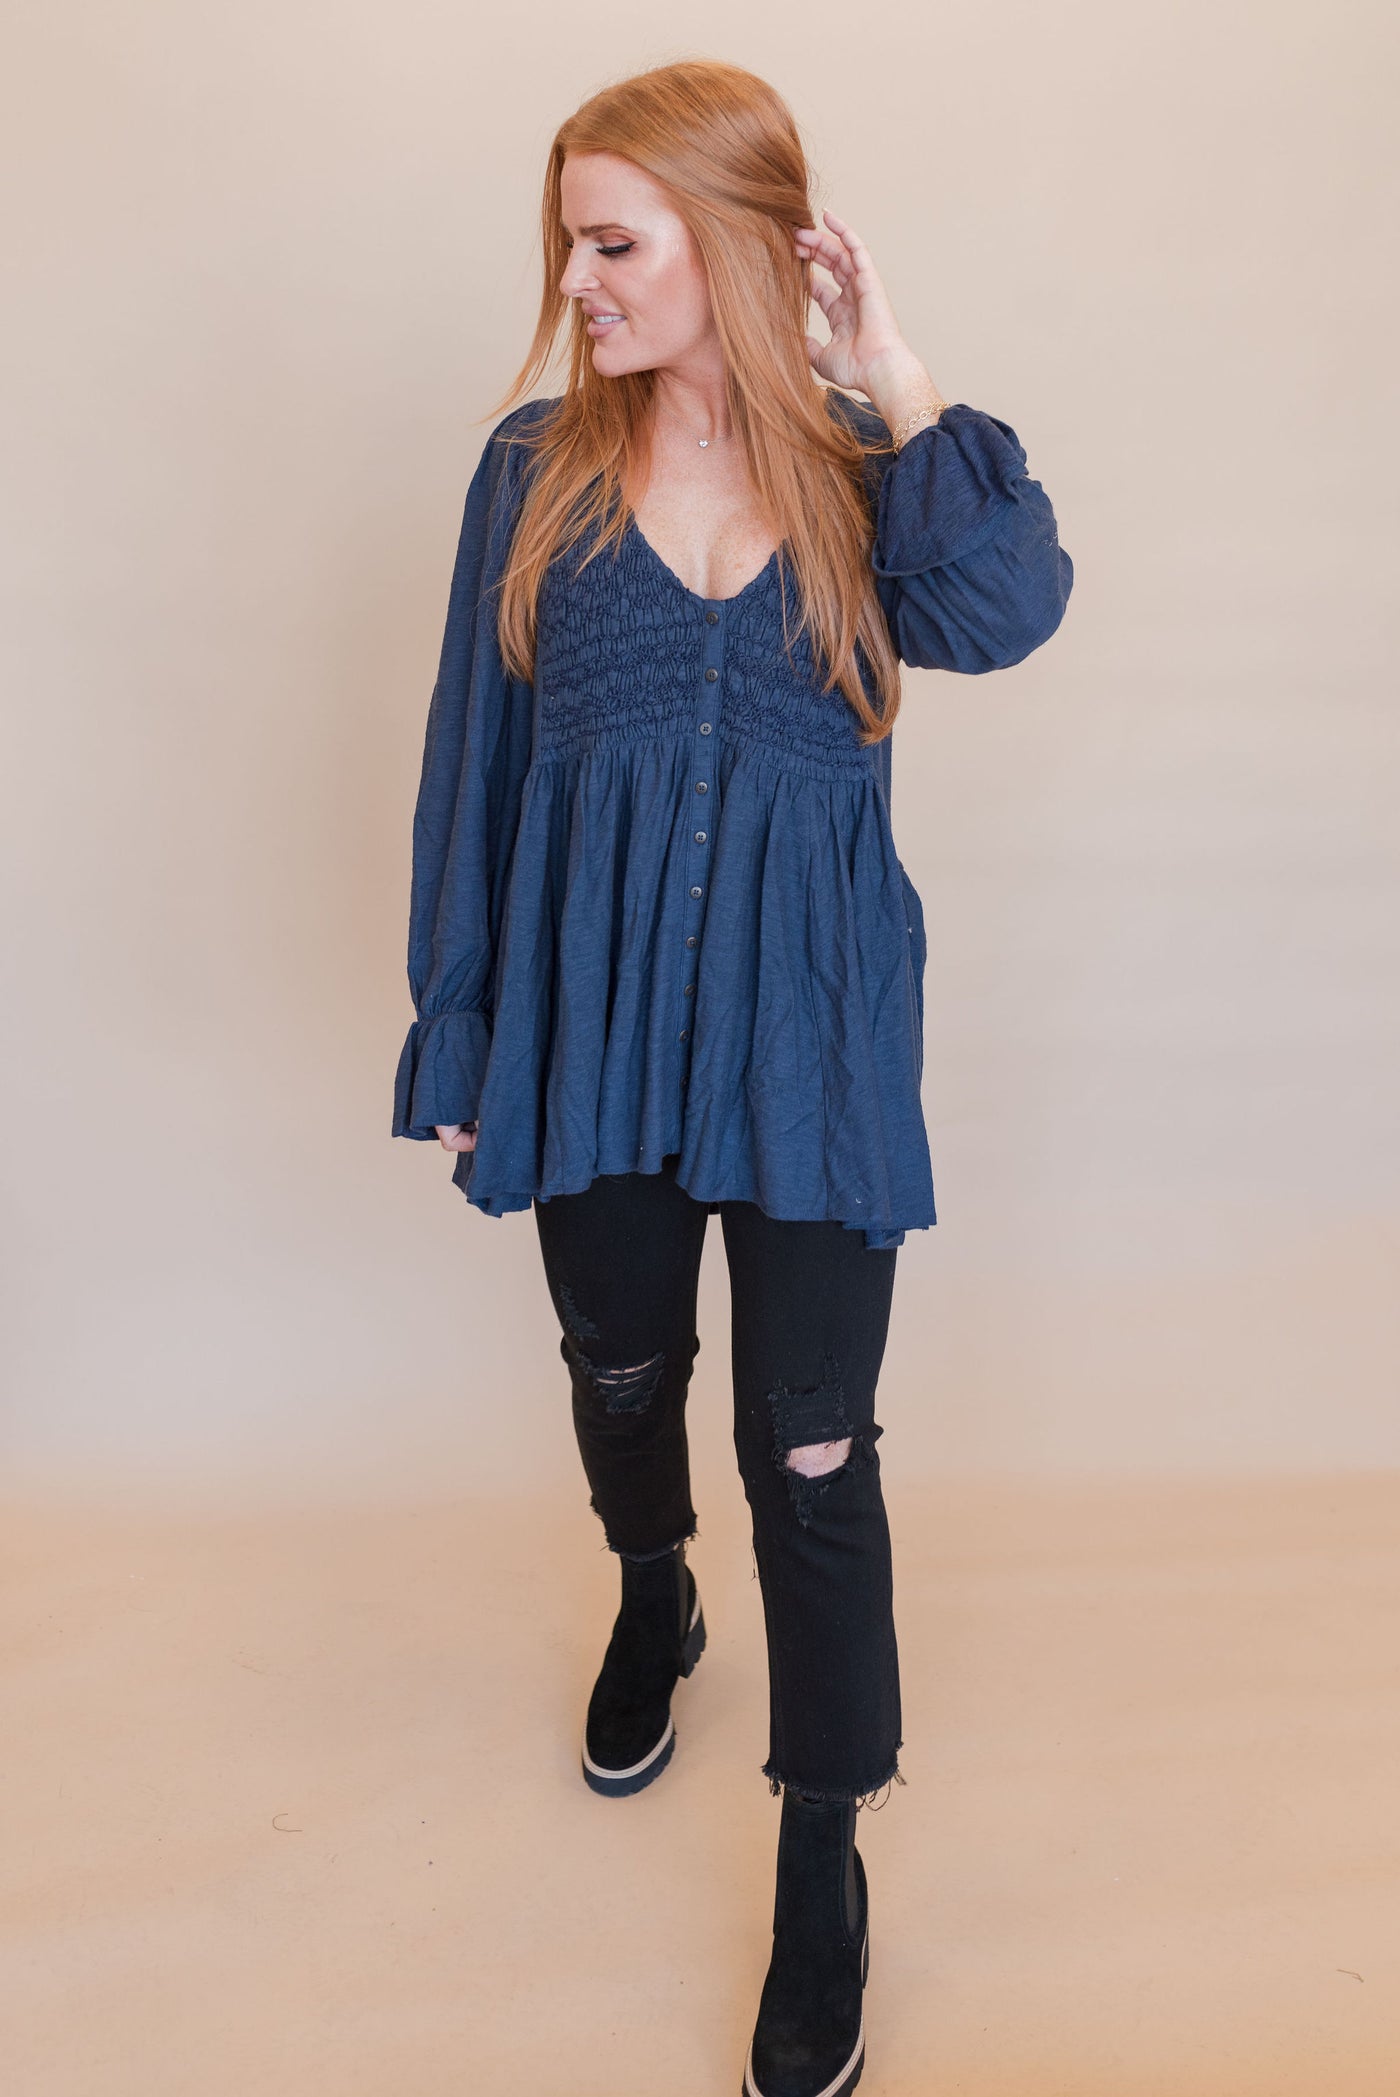 Free People | Don't Call Me Baby Thermal Tunic | Jazzberry